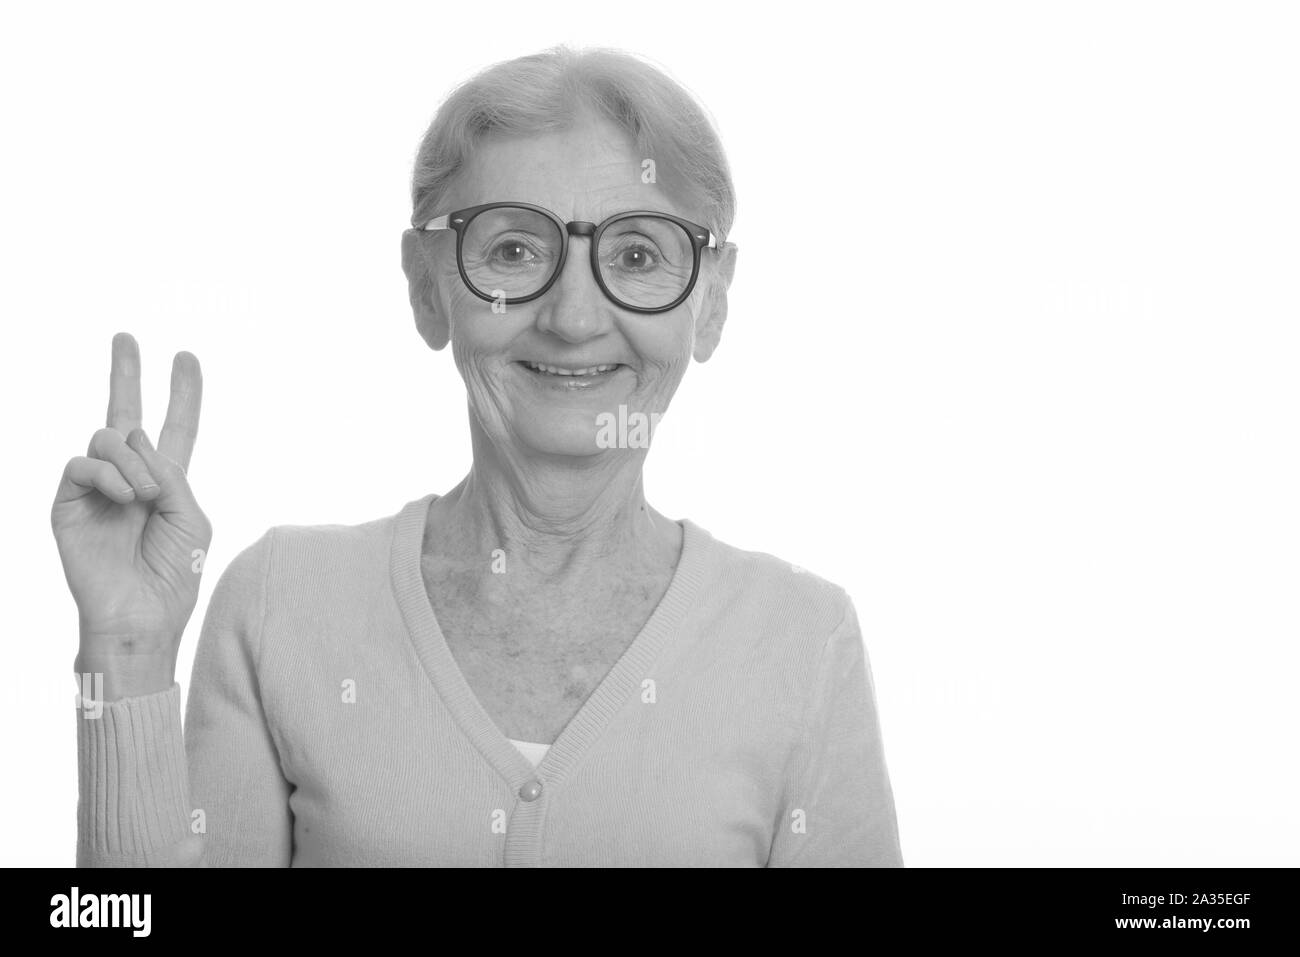 Happy senior nerd woman smiling while giving peace sign and wearing geeky eyeglasses Stock Photo